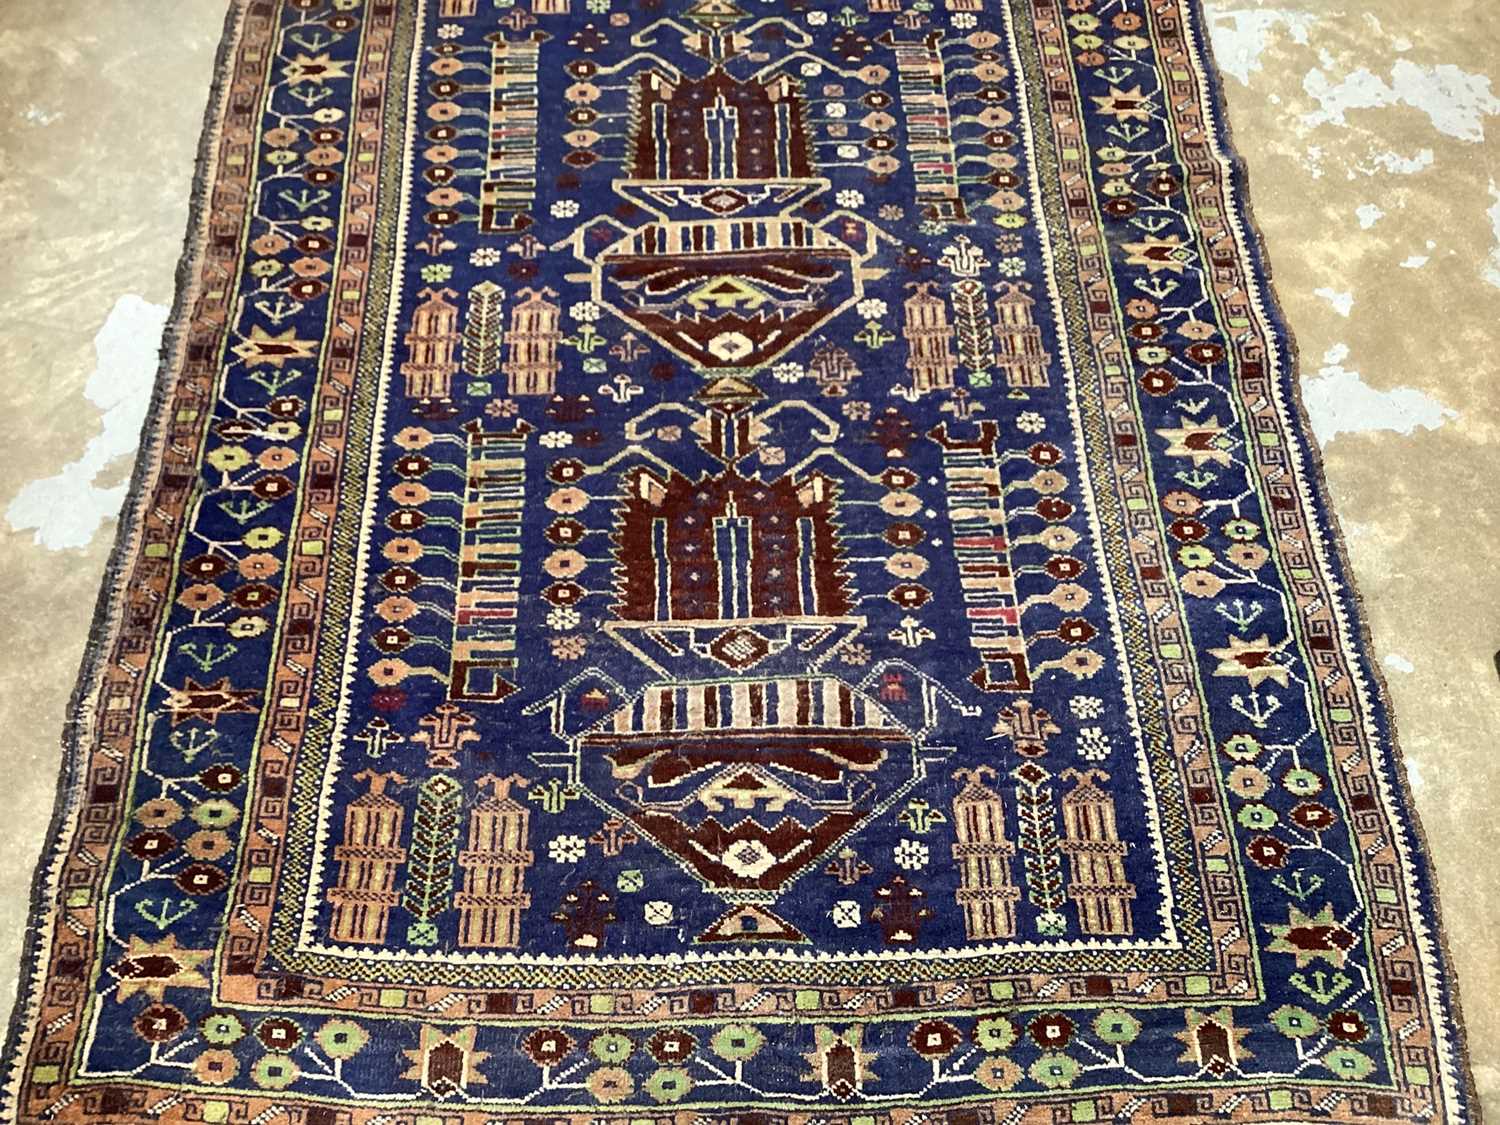 Eastern rug with geometric decoration on blue, green and brown ground, 196cm x 111cm - Image 2 of 4